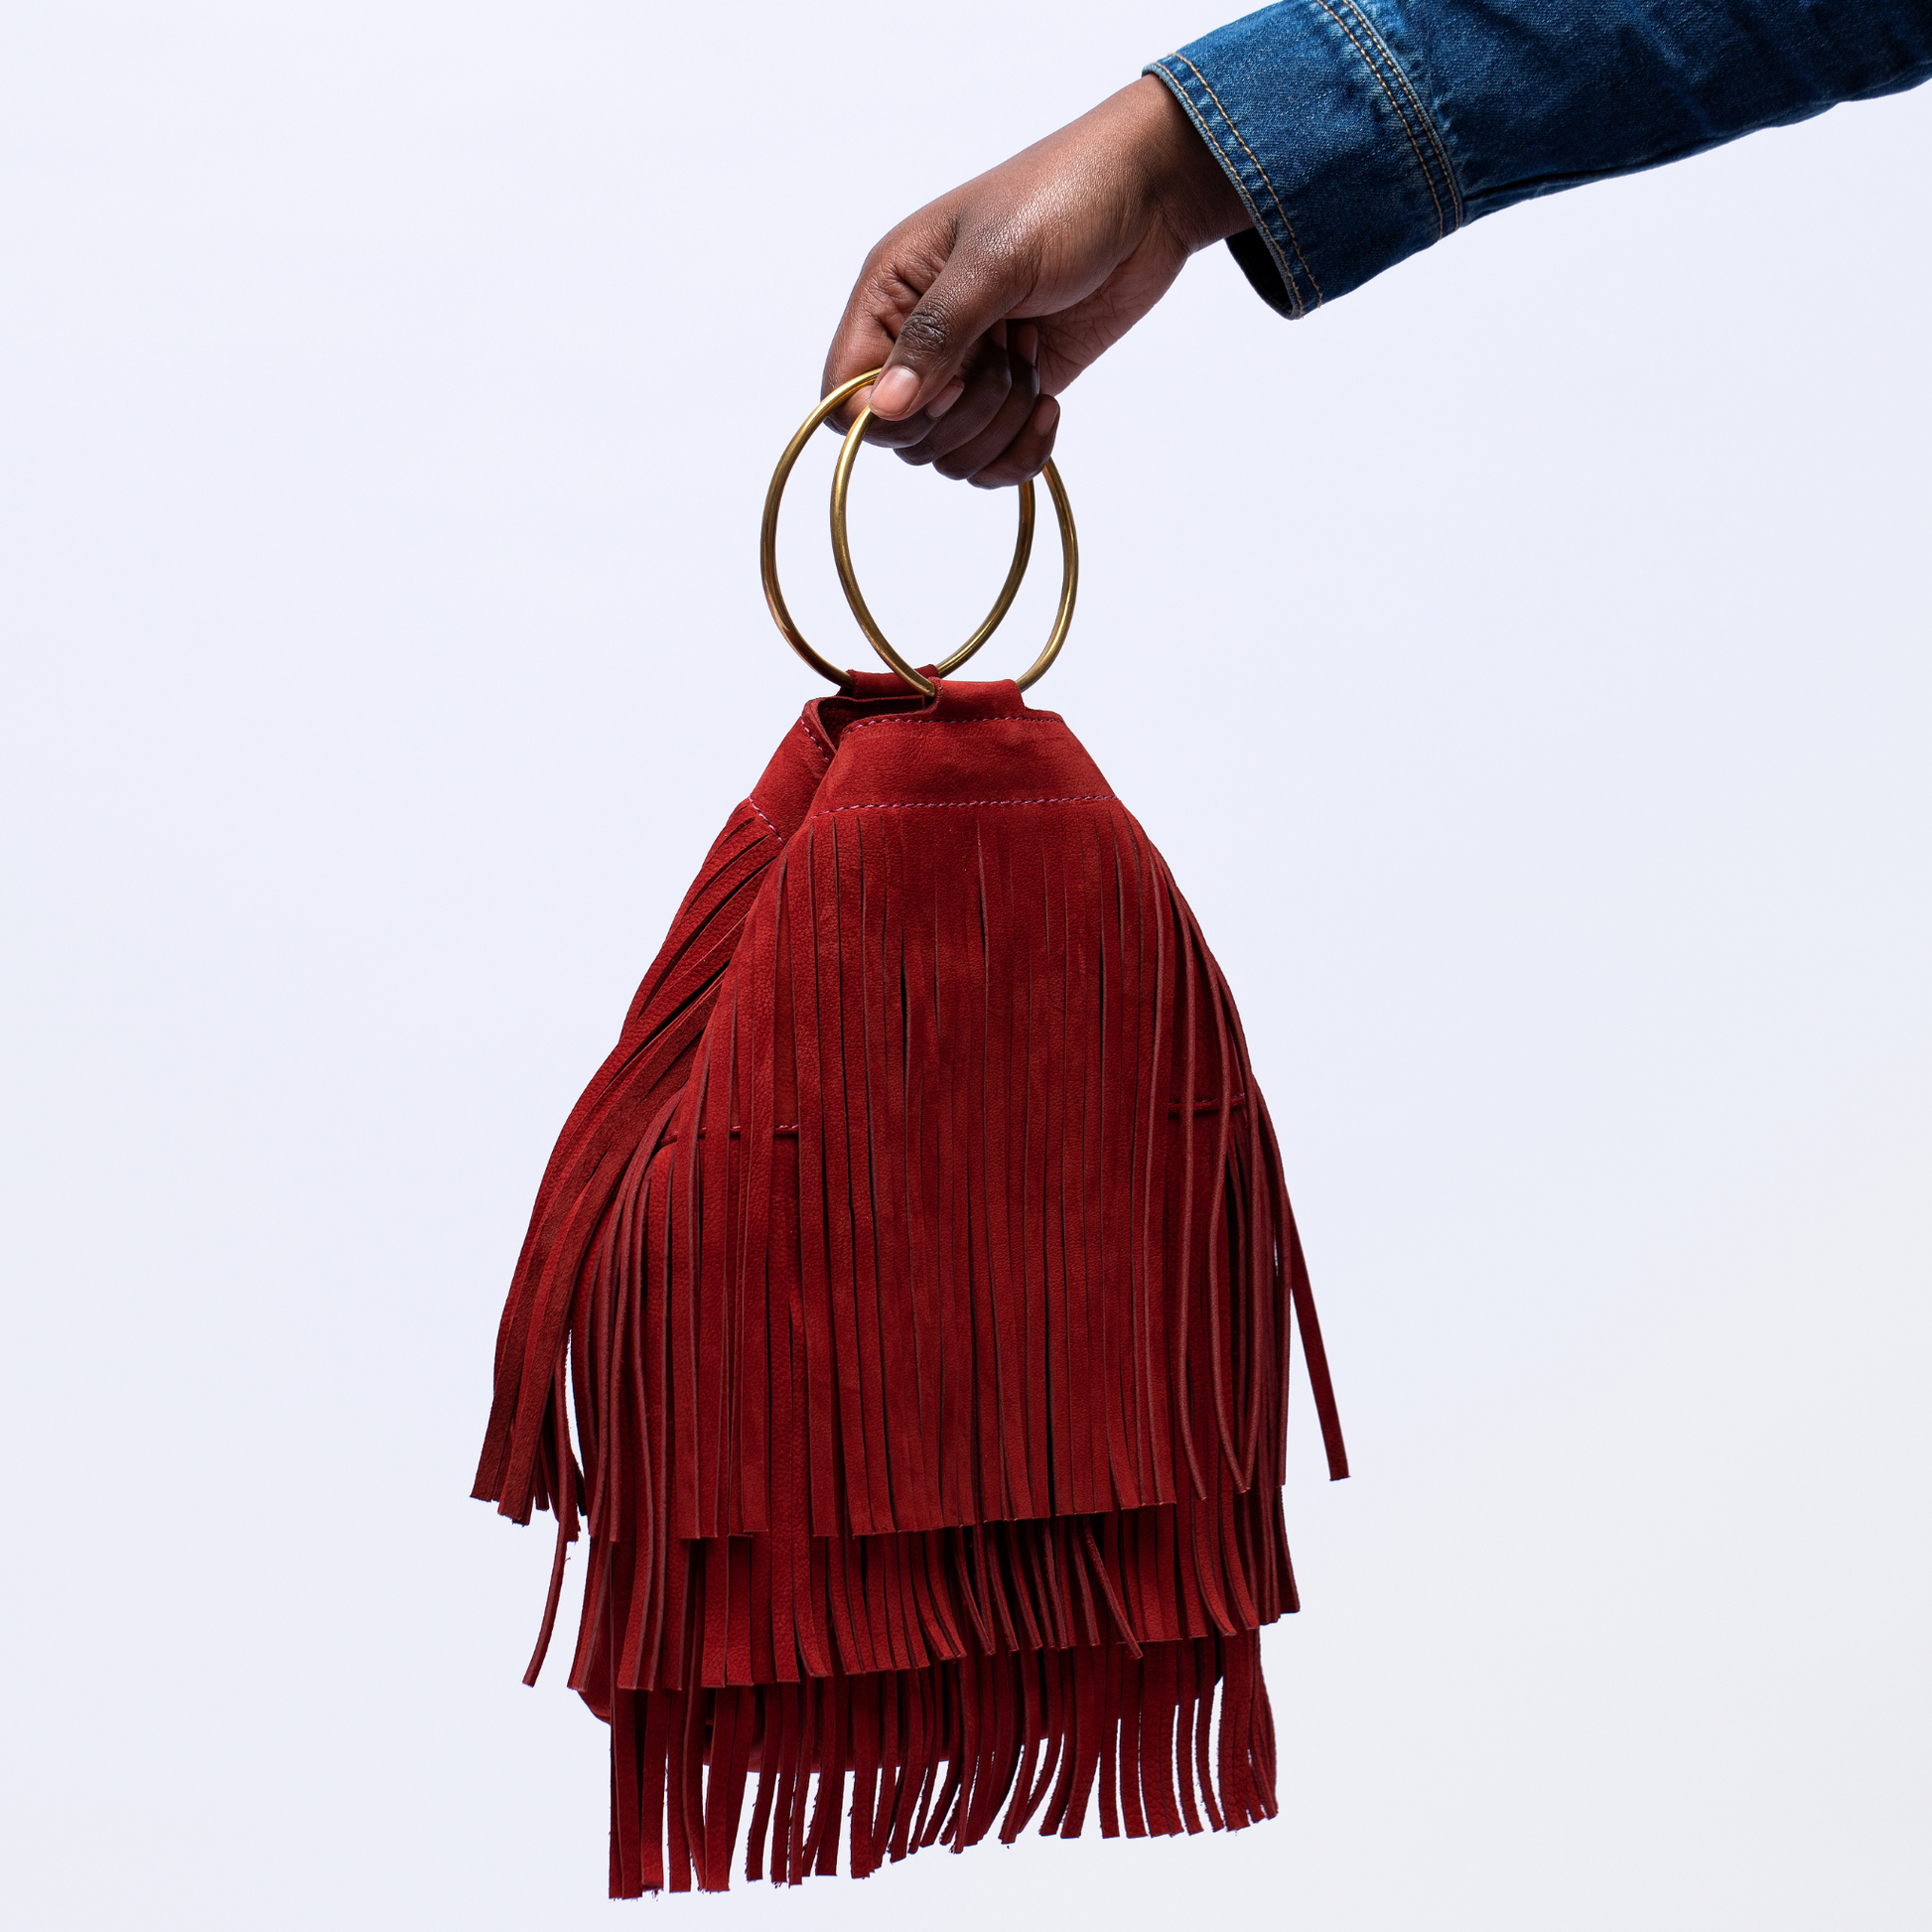 Flounce 2.0 bag in Roseberry hunting suede